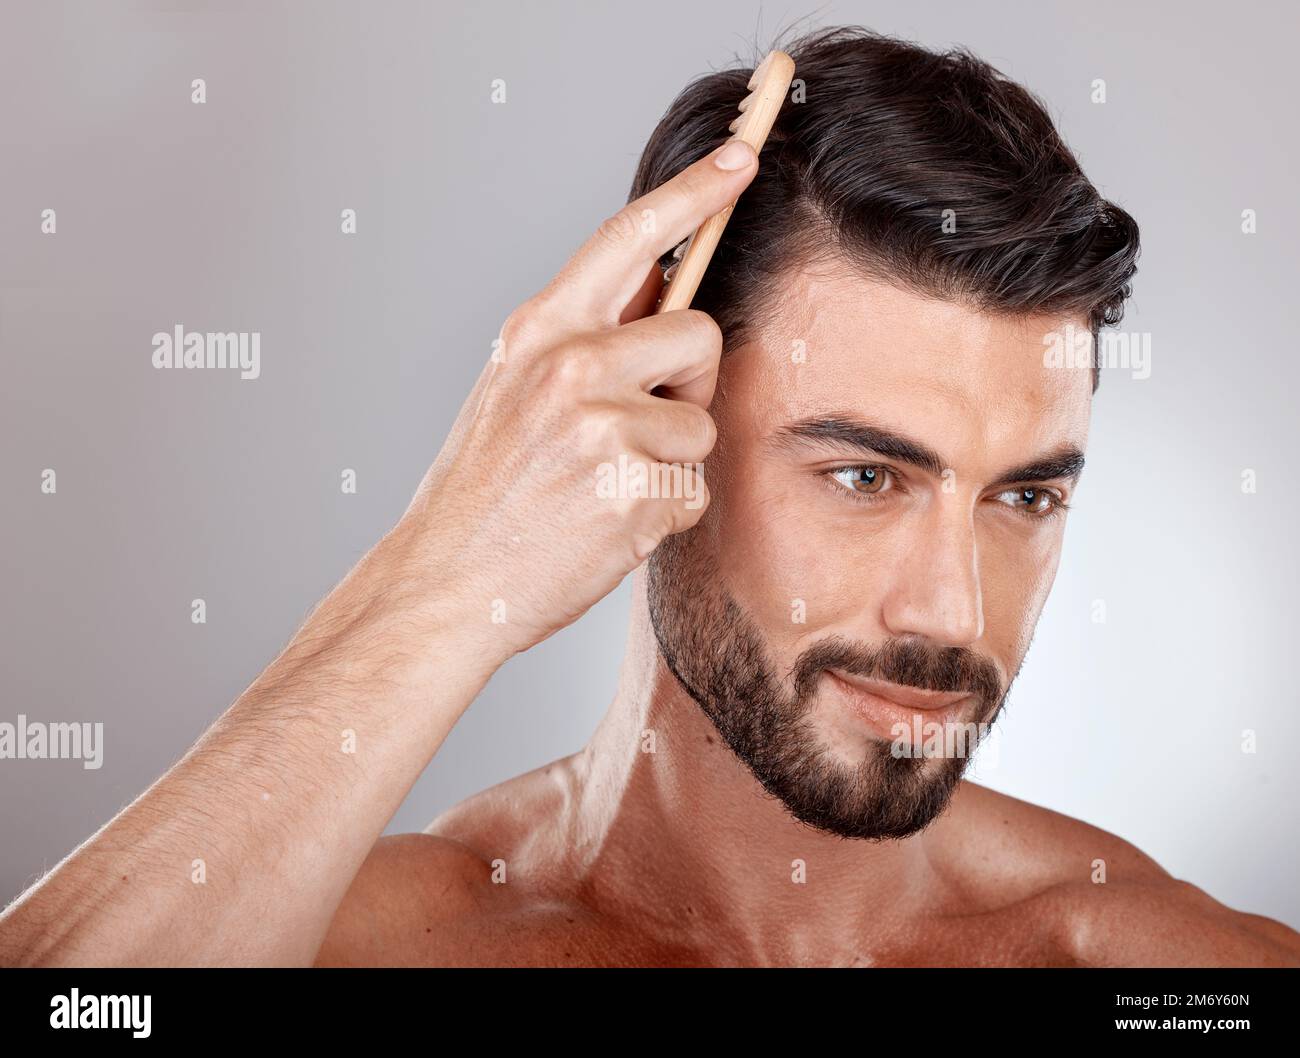 Comb, beauty or man brushing hair for grooming advertising or marketing salon hair care products. Thinking, studio background or healthy male model Stock Photo